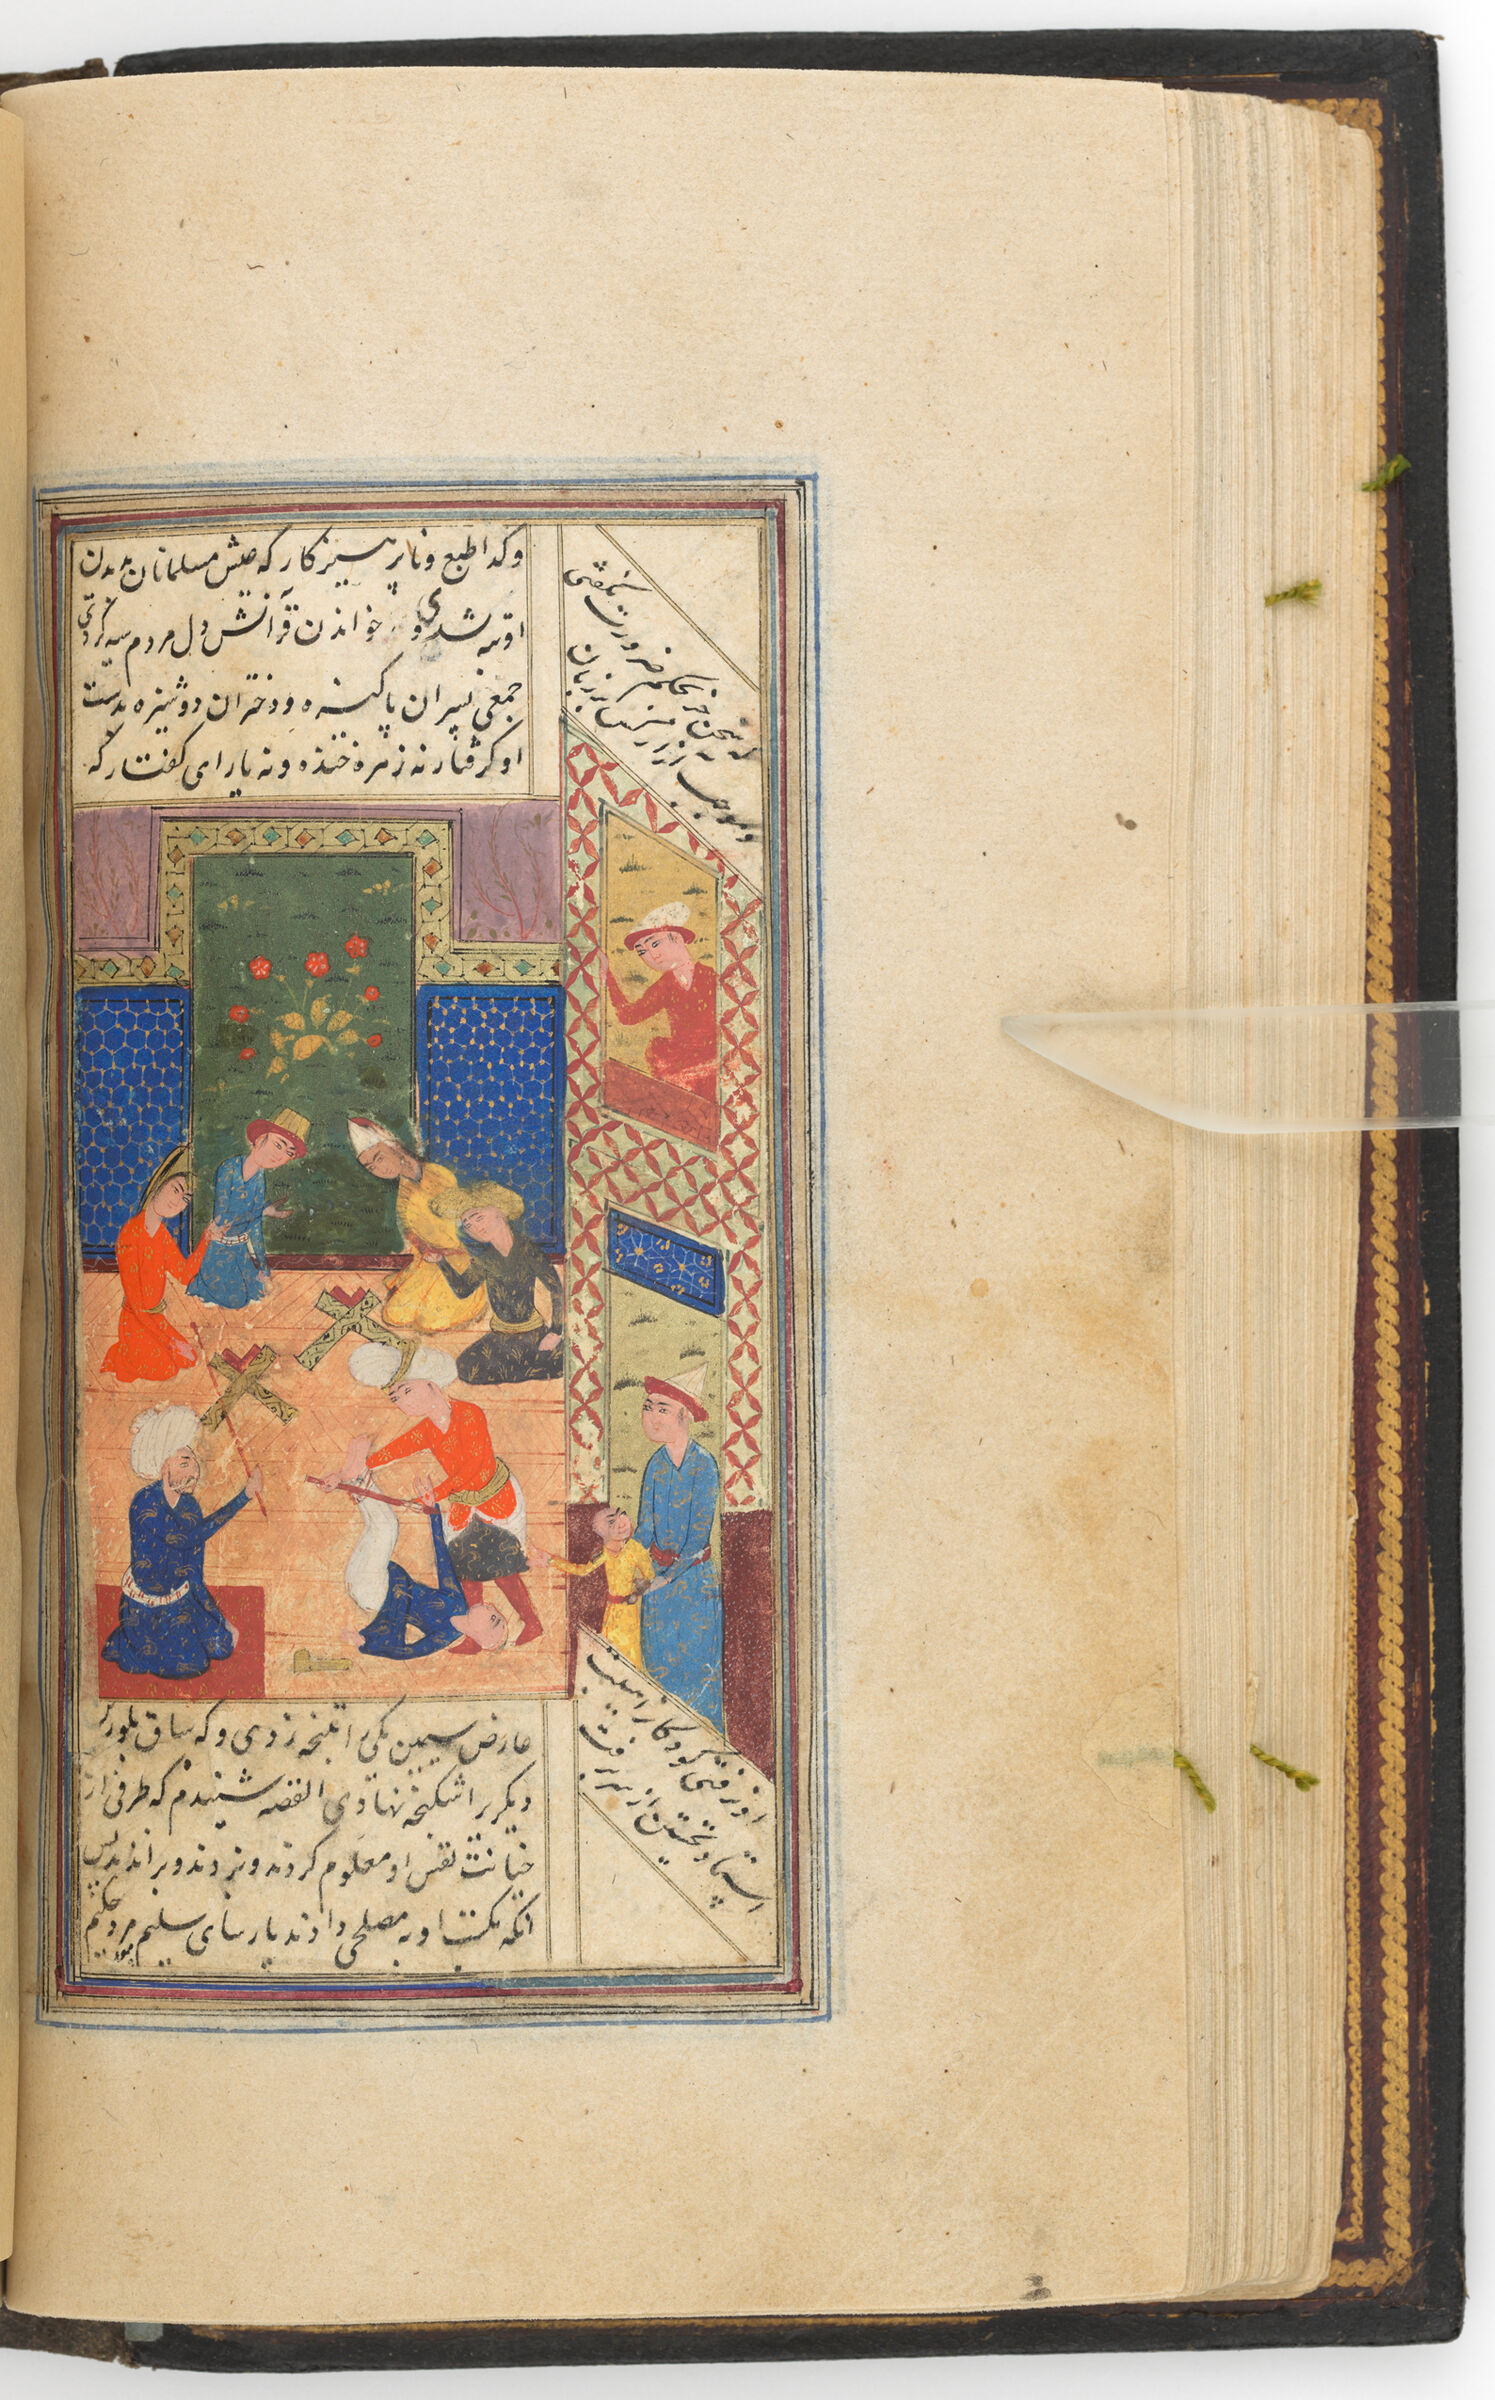 The Mean Teacher Who Beat Children At School (Text Recto; Painting Verso Of Folio 64), Painting From A Manuscript Of The Kulliyat Of Sa‘di